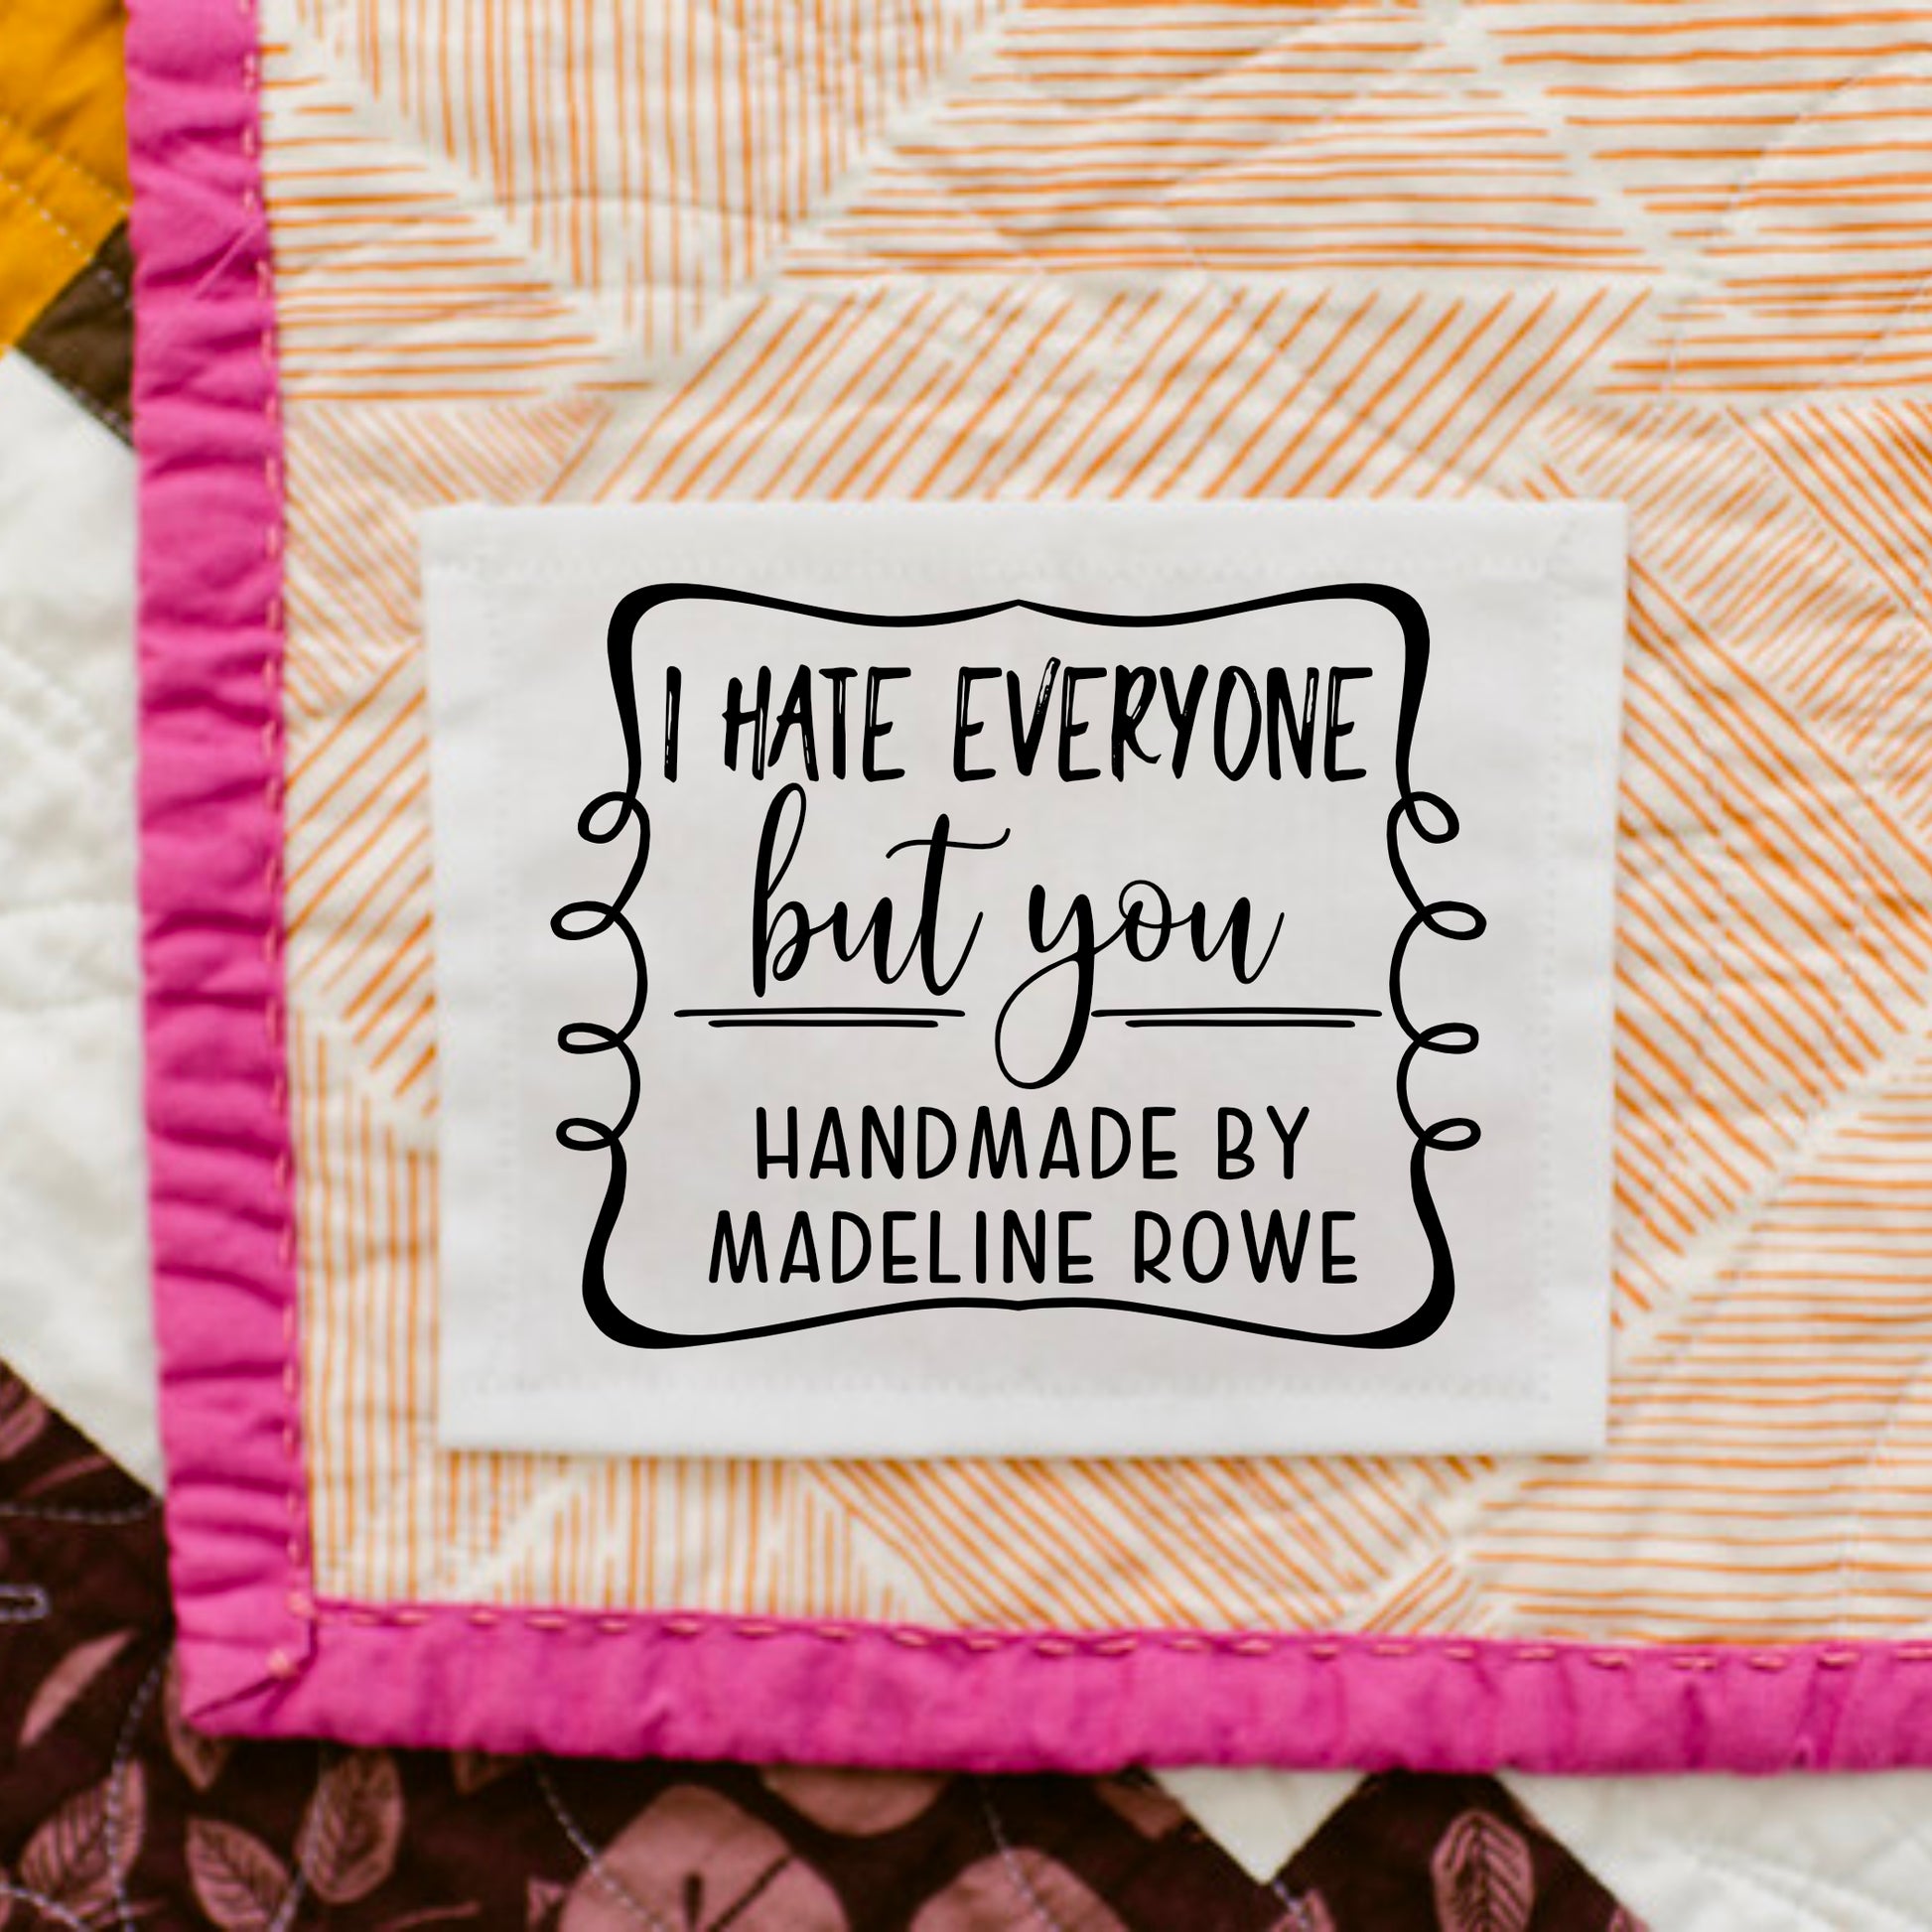 I hate everyone but you sassy quilt label